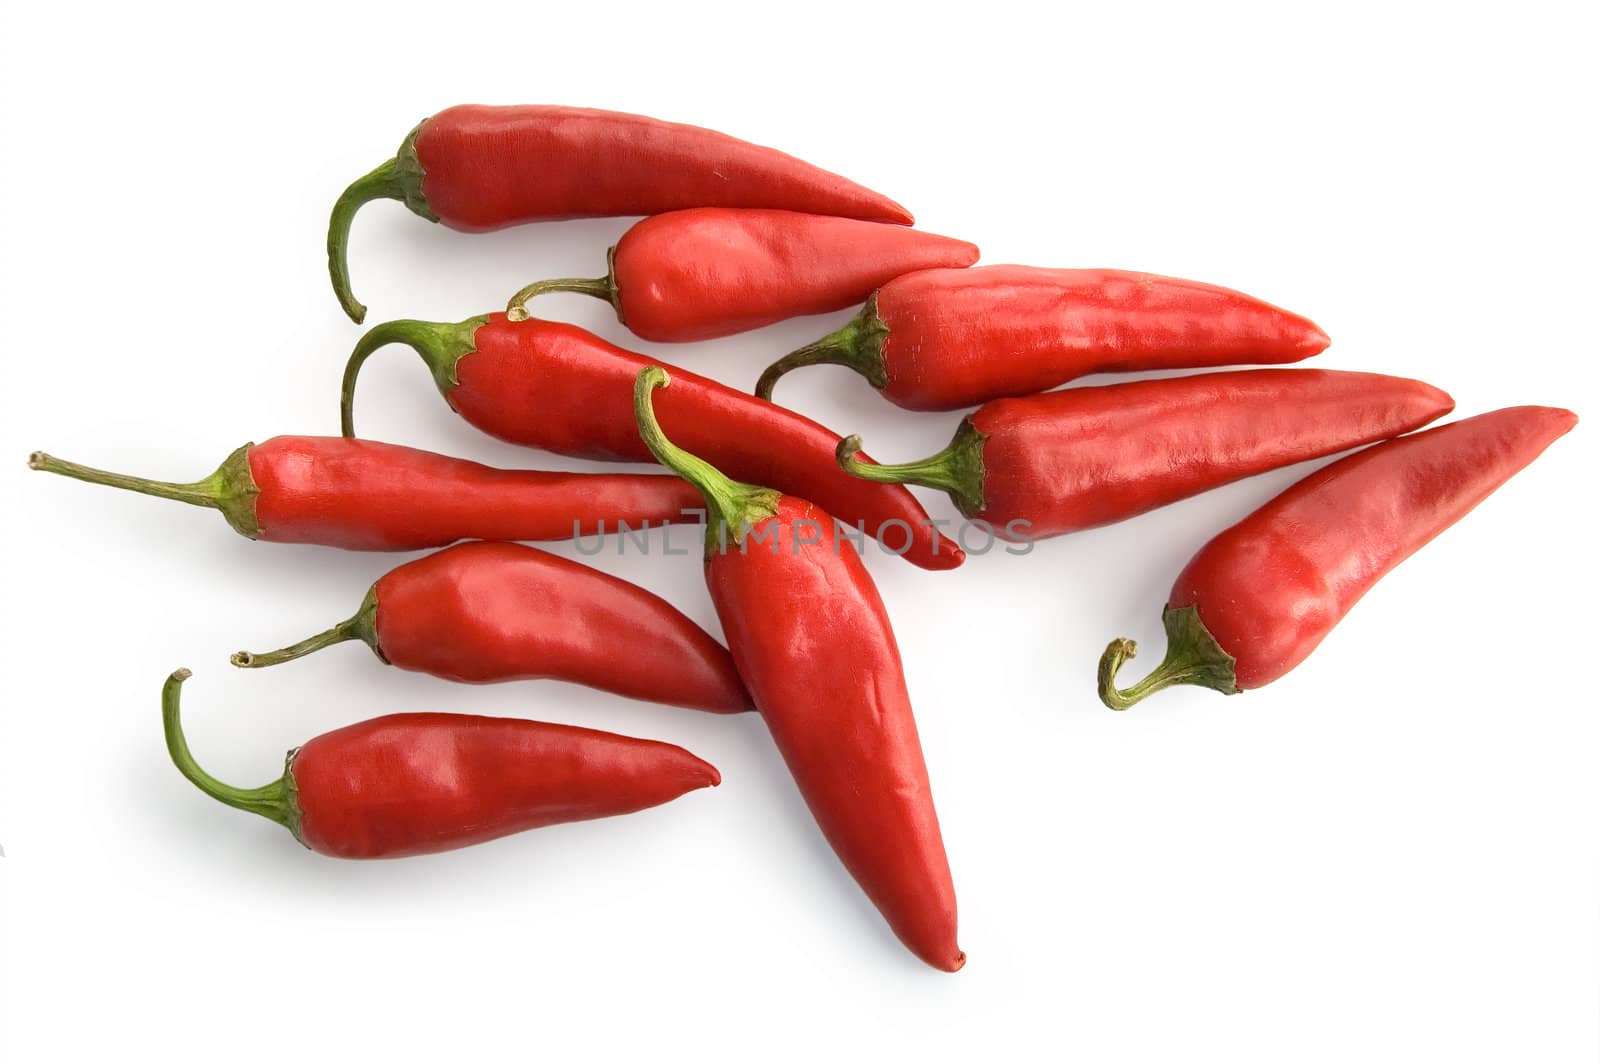 Some chili peppers isolated on white background